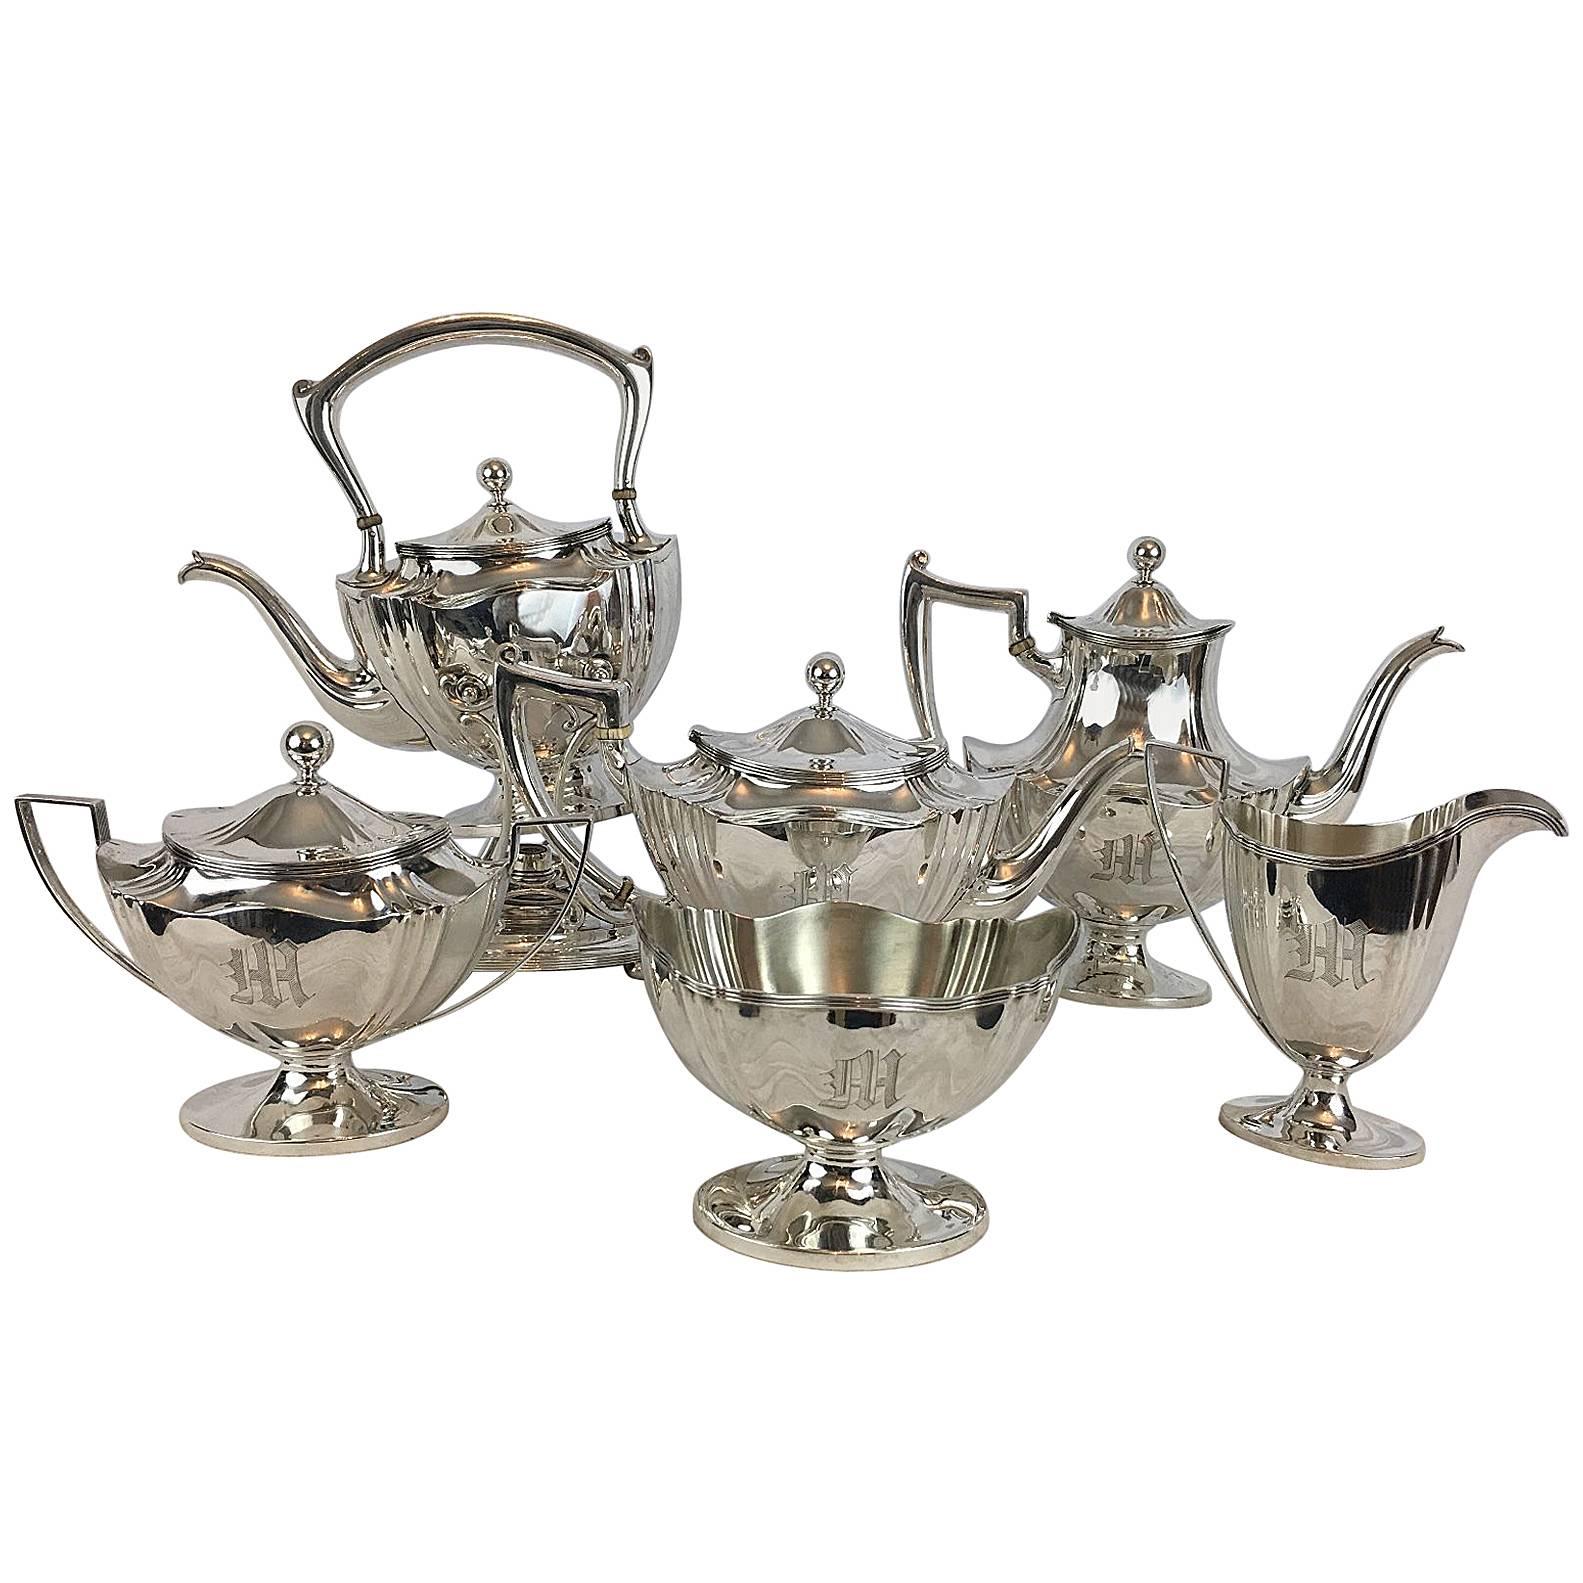 Whiting Manufacturing Co Tea & Coffee Service Sterling Silver, American